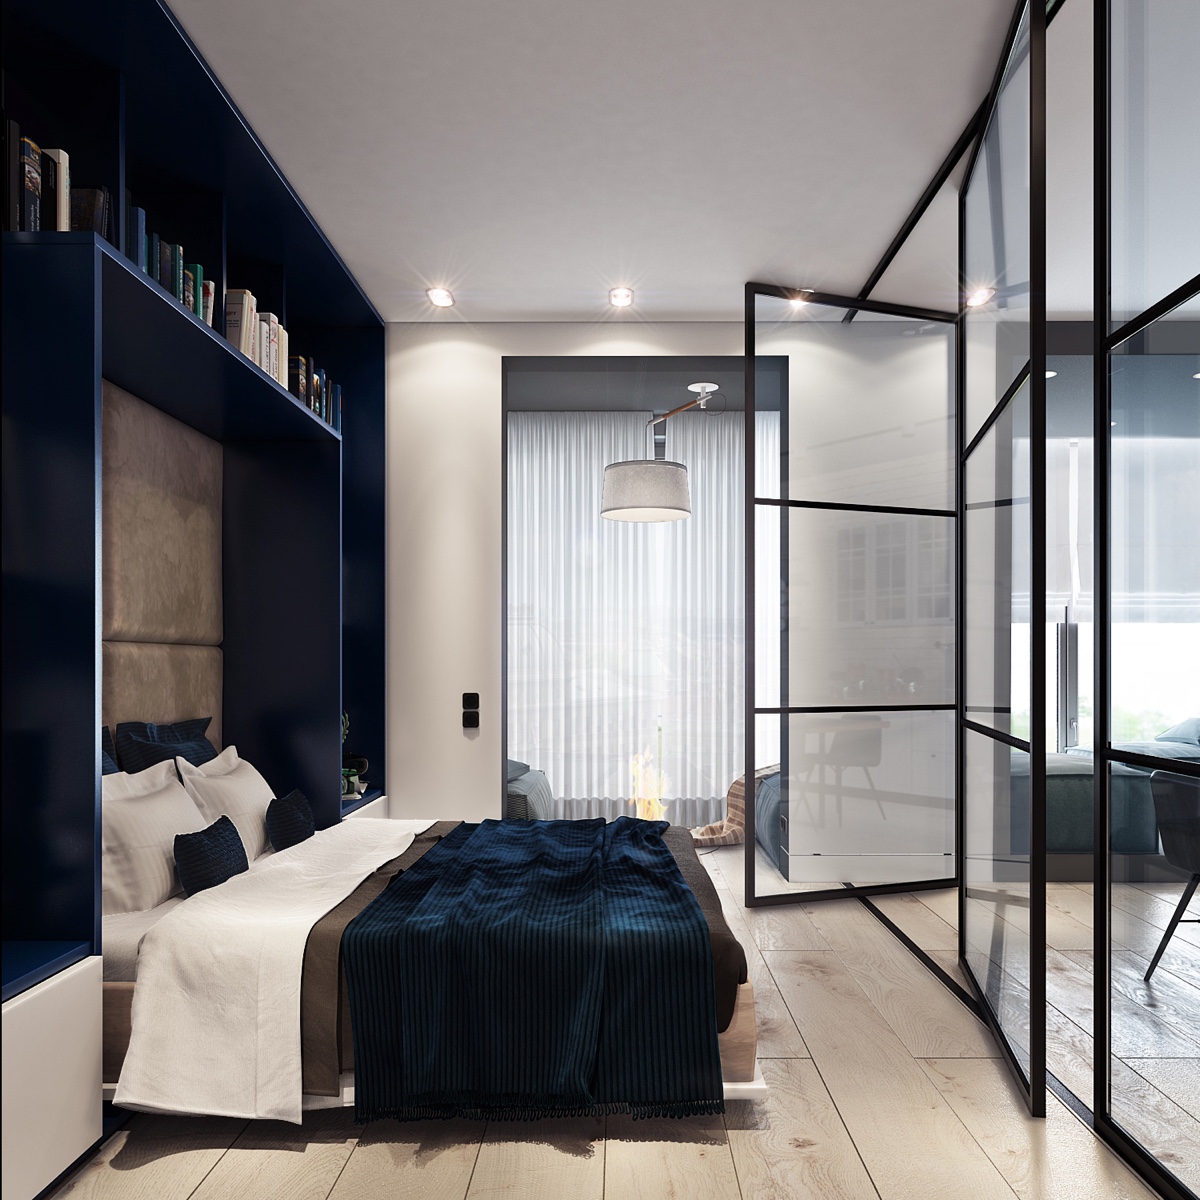 Beautiful studio apartment designs combined with modern and chic decor ideas